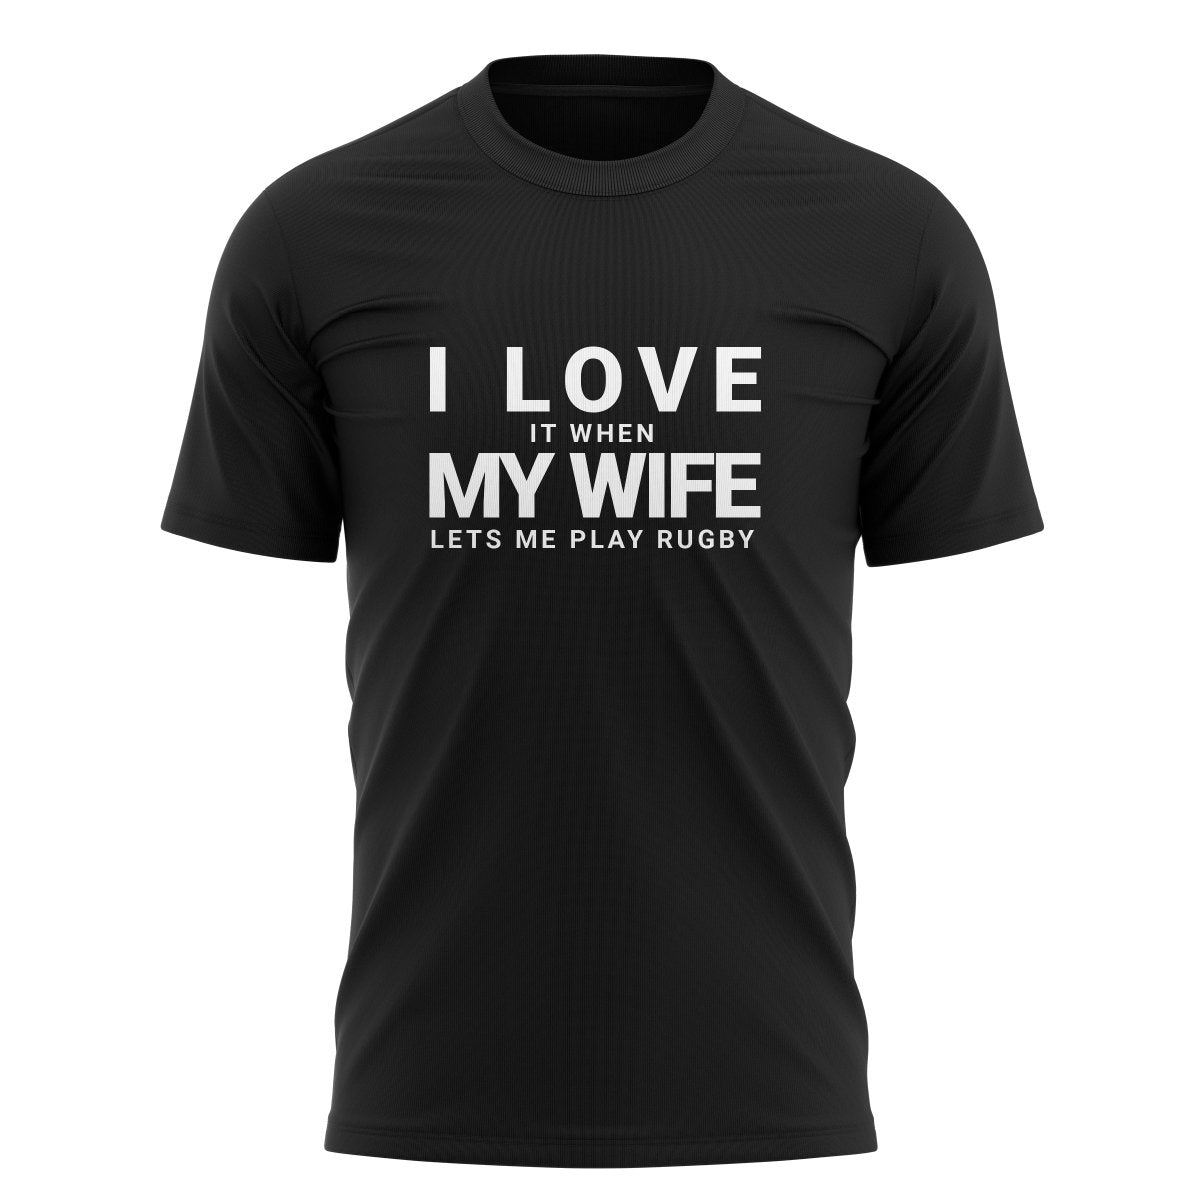 I Love My Wife Graphic Tee - www.therugbyshop.com www.therugbyshop.com MEN&#39;S / BLACK / S SANMAR TEES I Love My Wife Graphic Tee